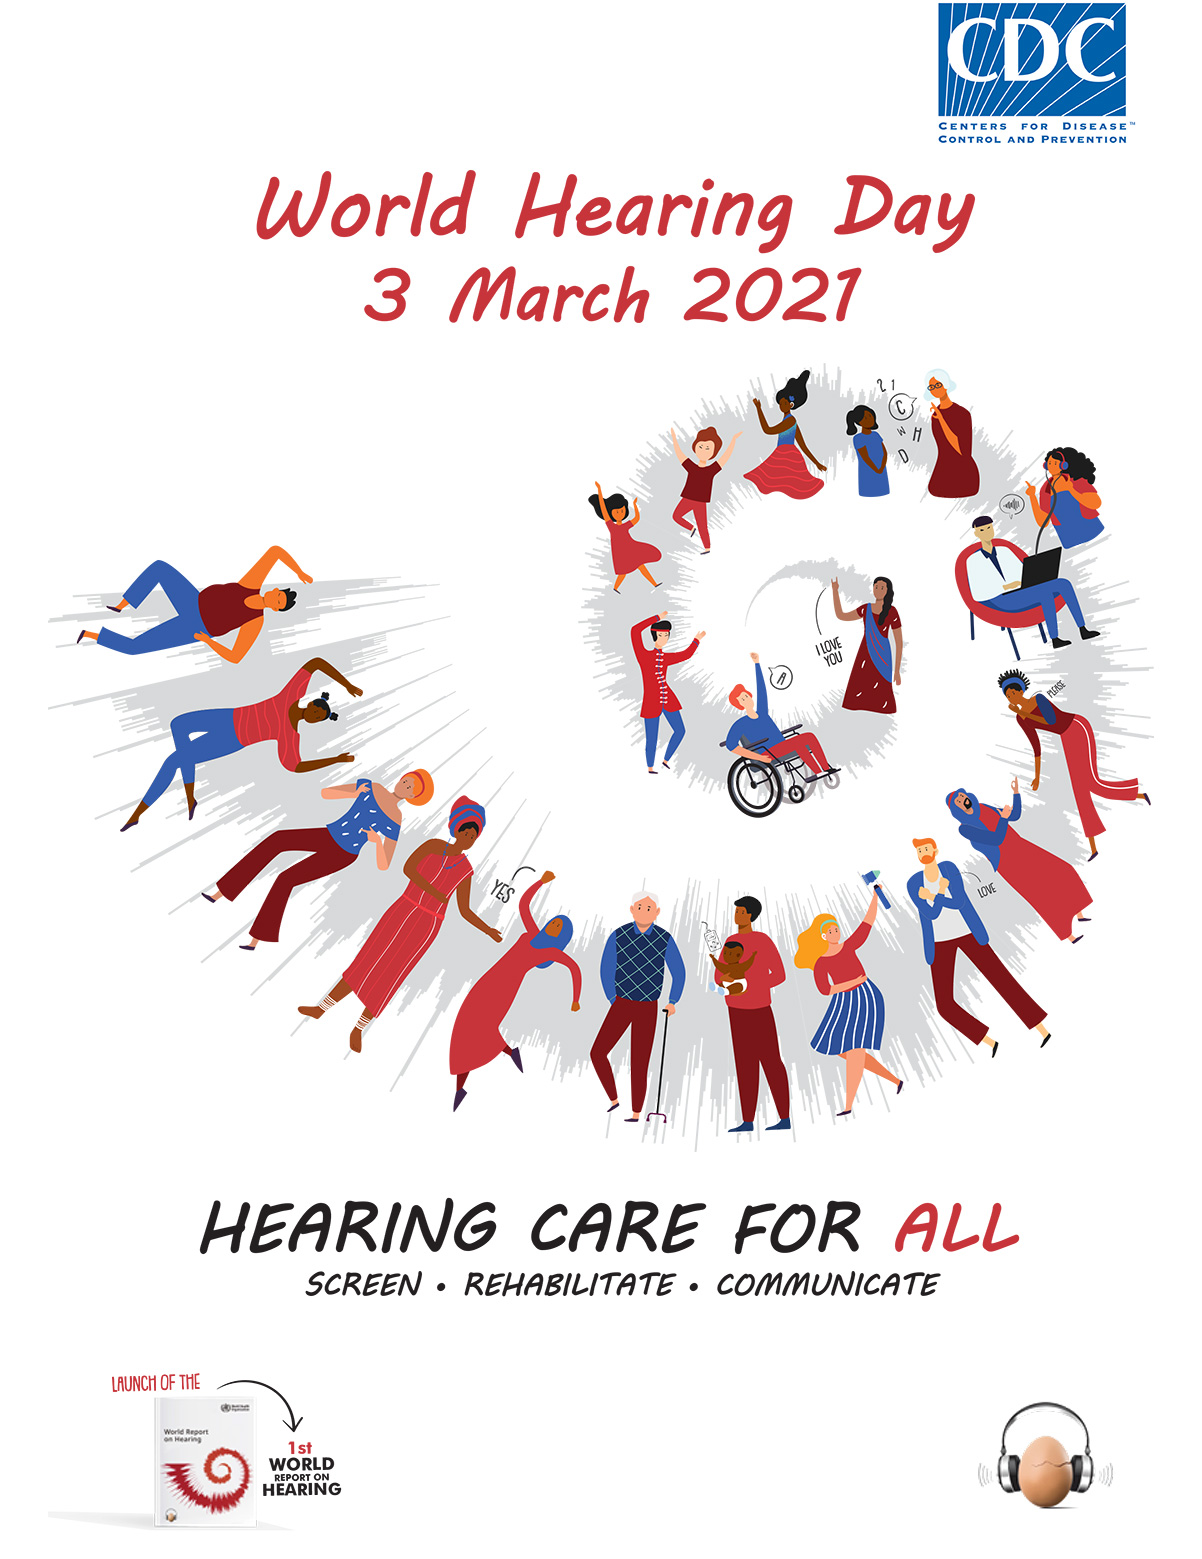 World Hearing Day March 3, 2021. Hearing care for all. Screen, rehabilitate and communicate.